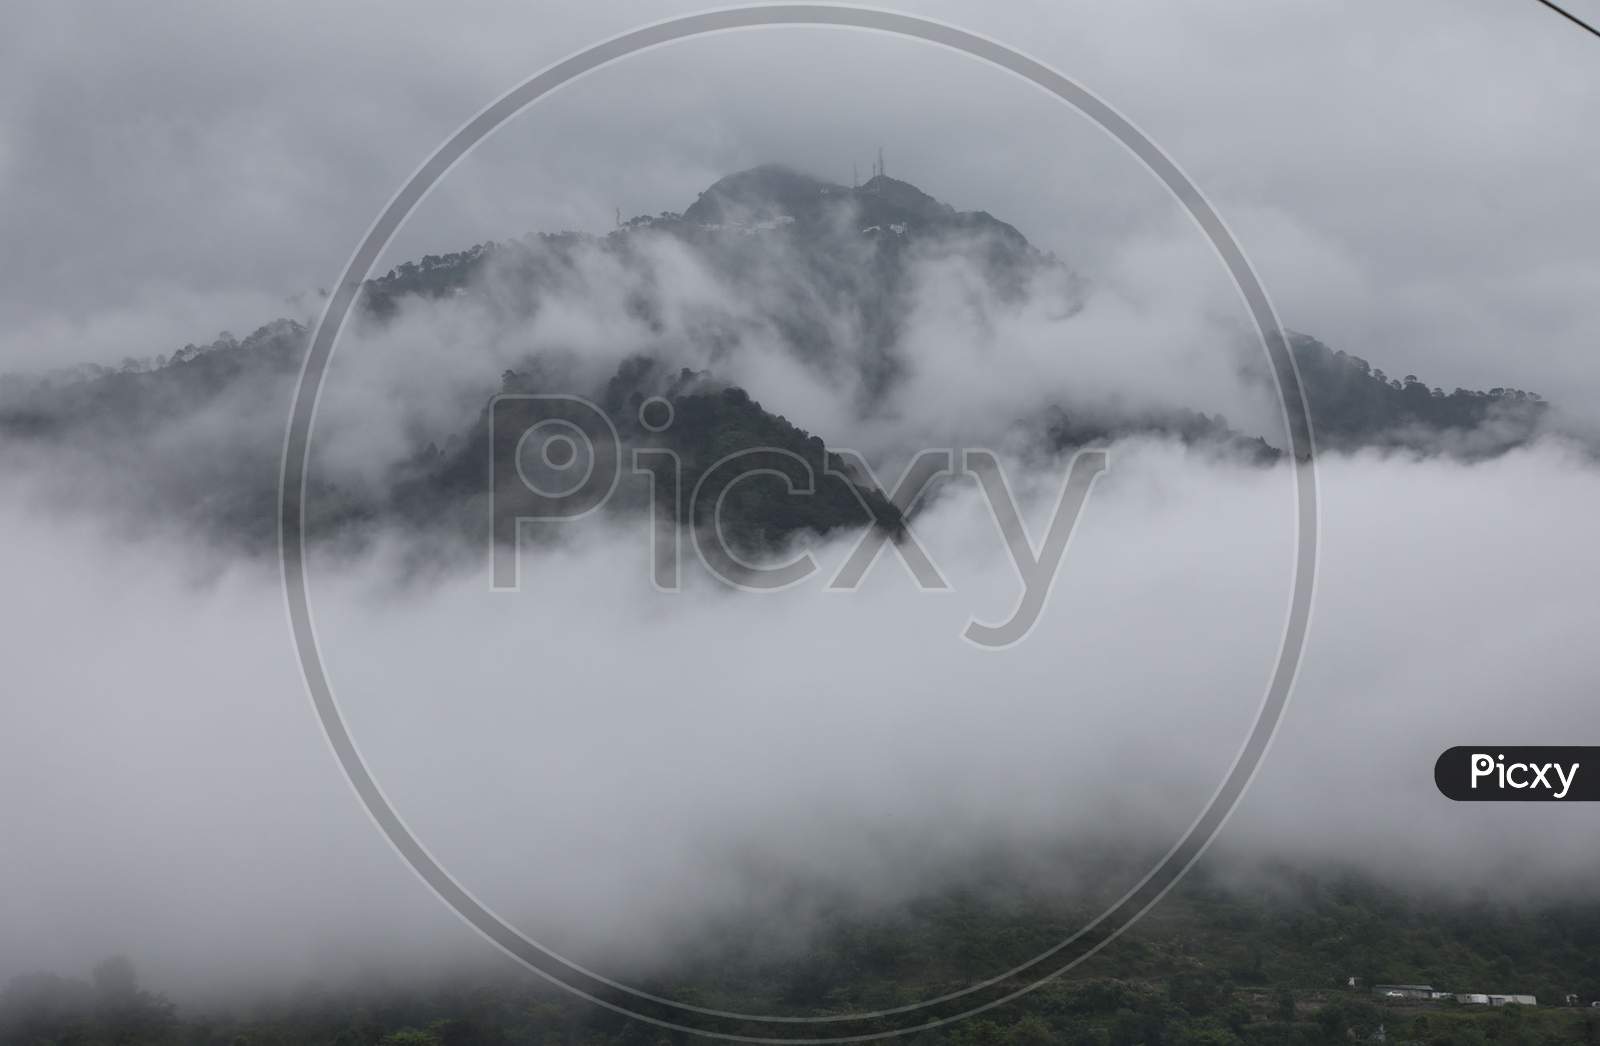 A View Of Clouds Cover Trikuta Hills (Mata Vaishno Devi) After Heavy Rainfall At Katra In Jammu  August 20, 2020.